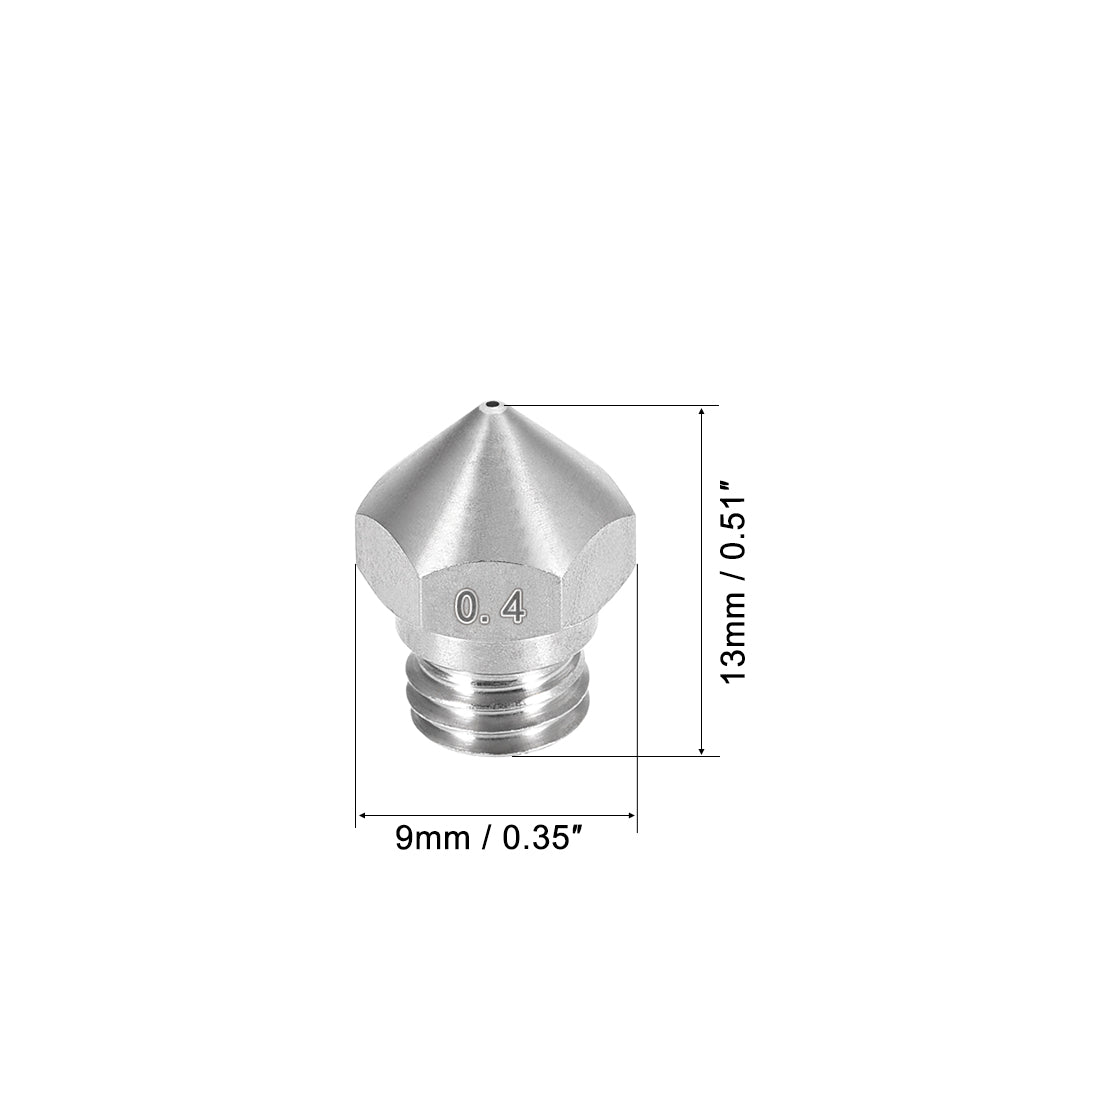 uxcell Uxcell 0.4mm 3D Printer Nozzle, Fit for MK10, for 1.75mm Filament Stainless Steel 5pcs